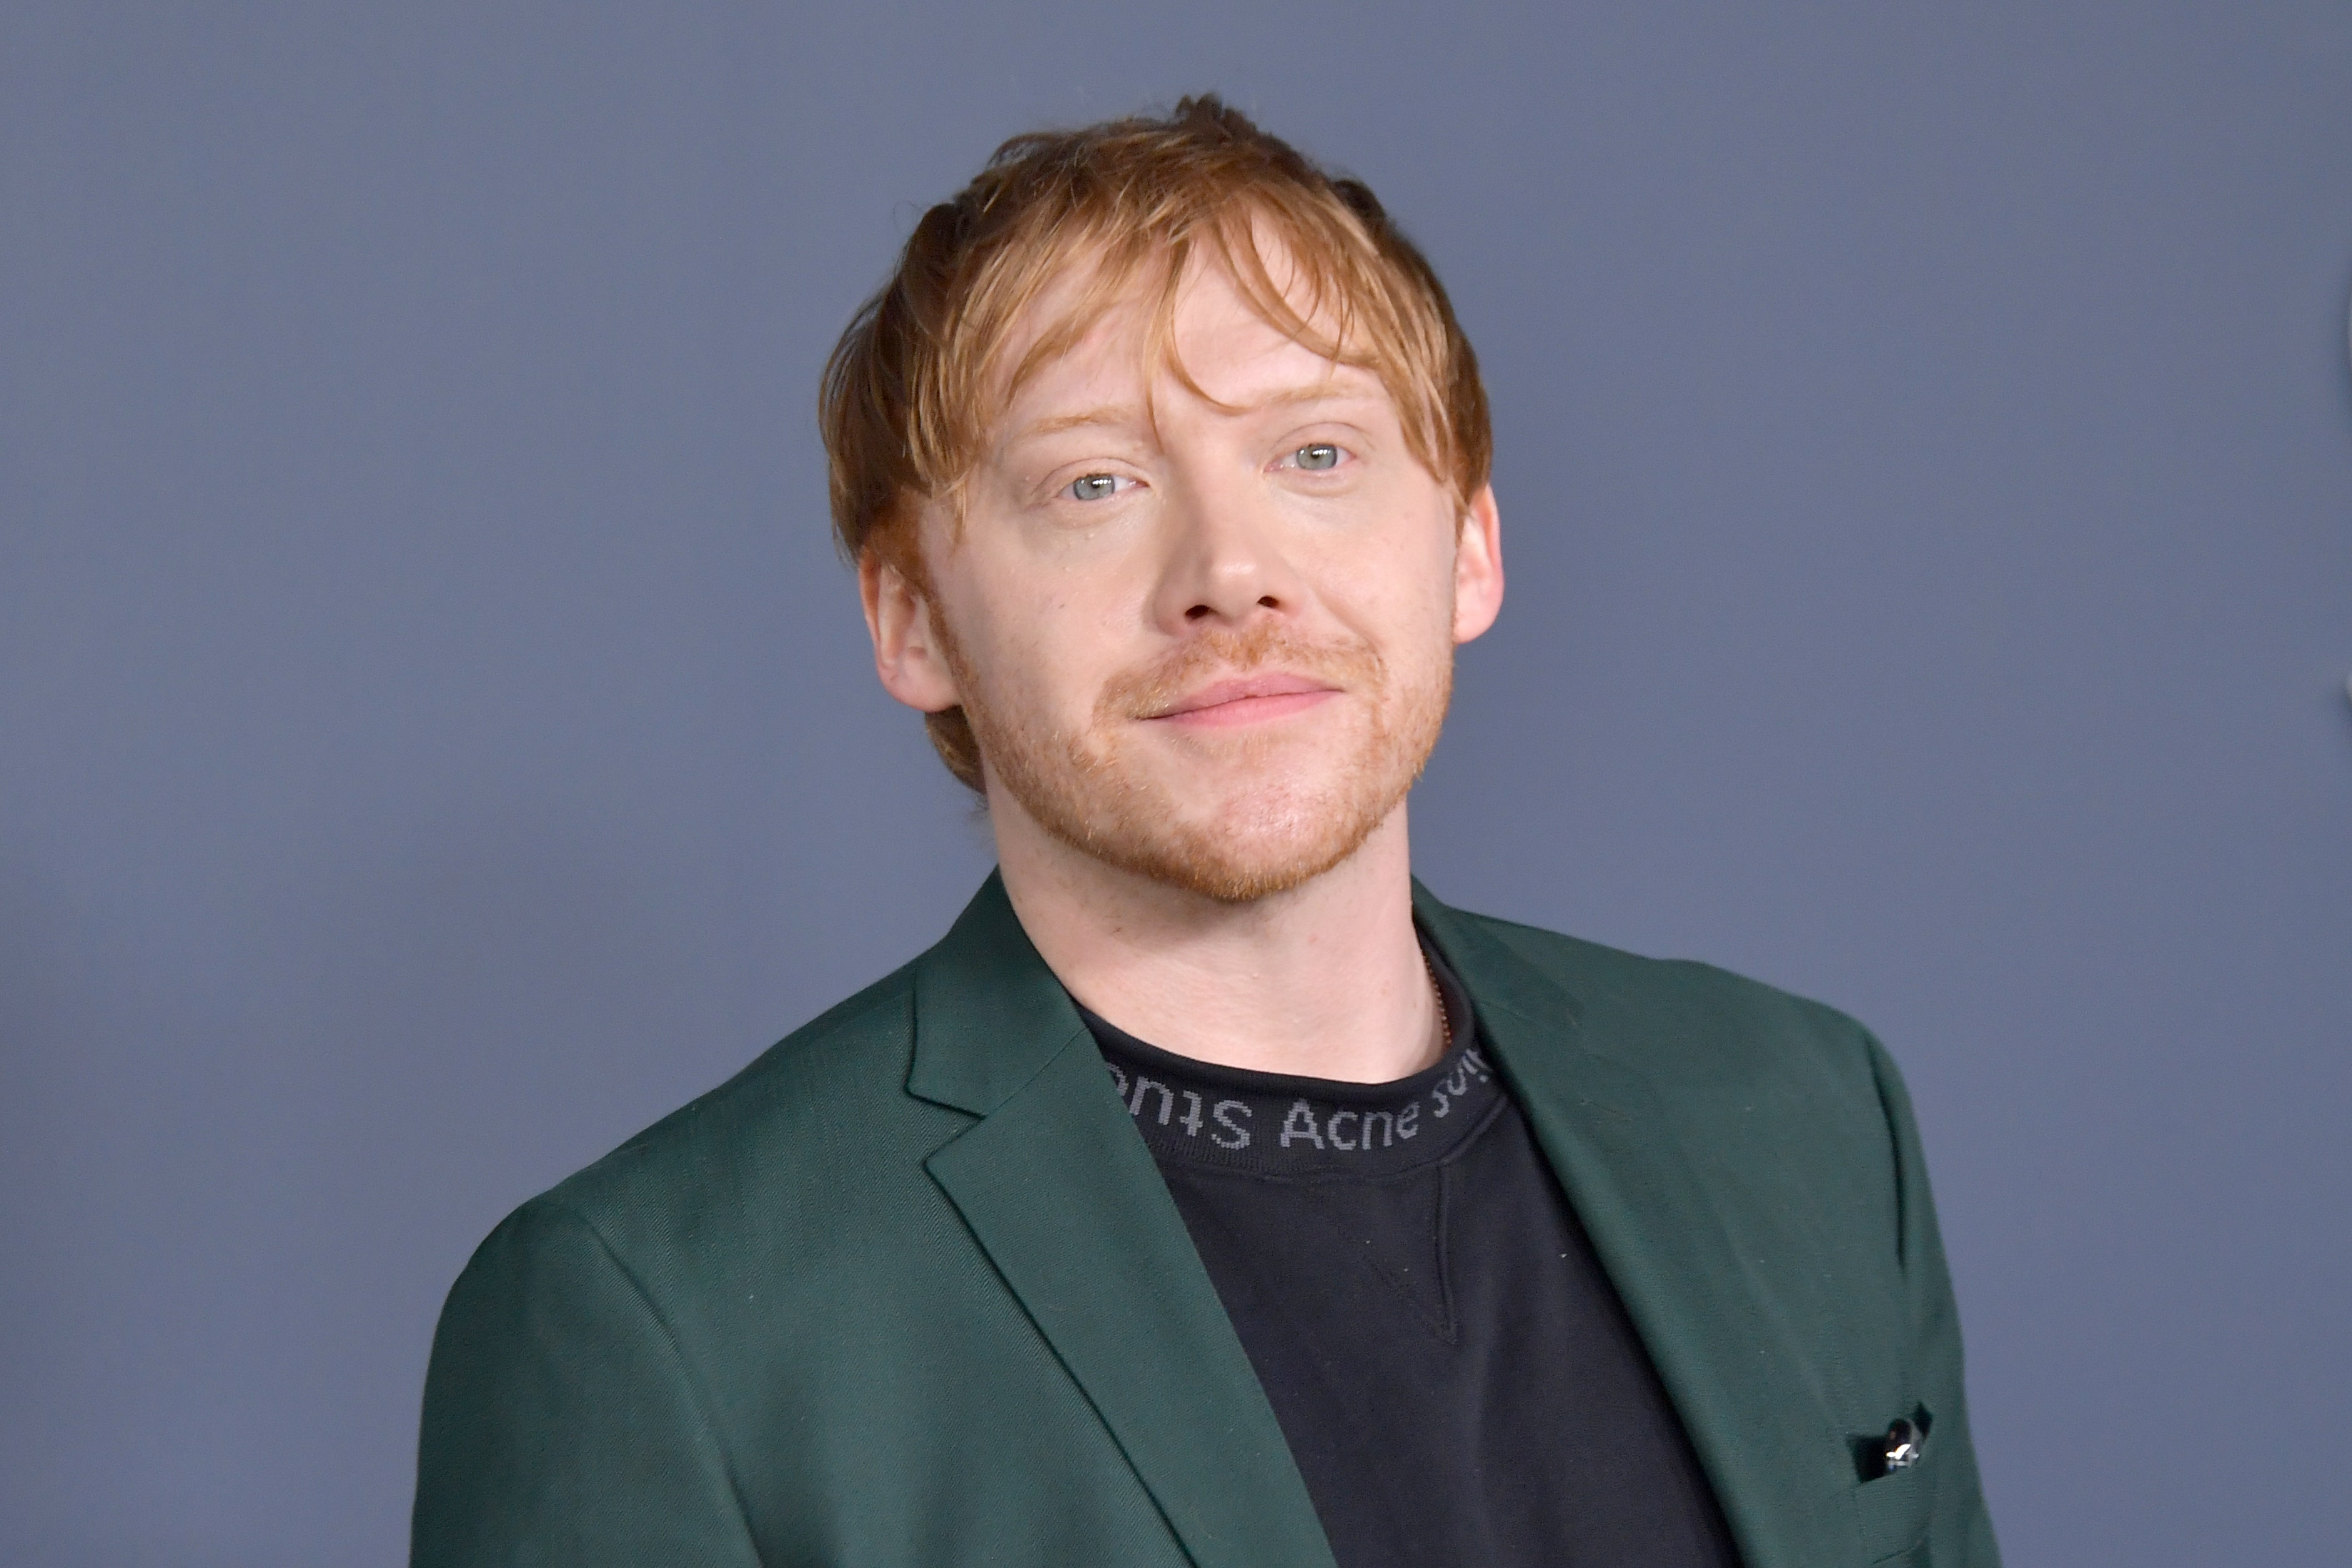 ‘Harry Potter’ star Rupert Grint says cast is ‘still trying to figure out what life looks like’